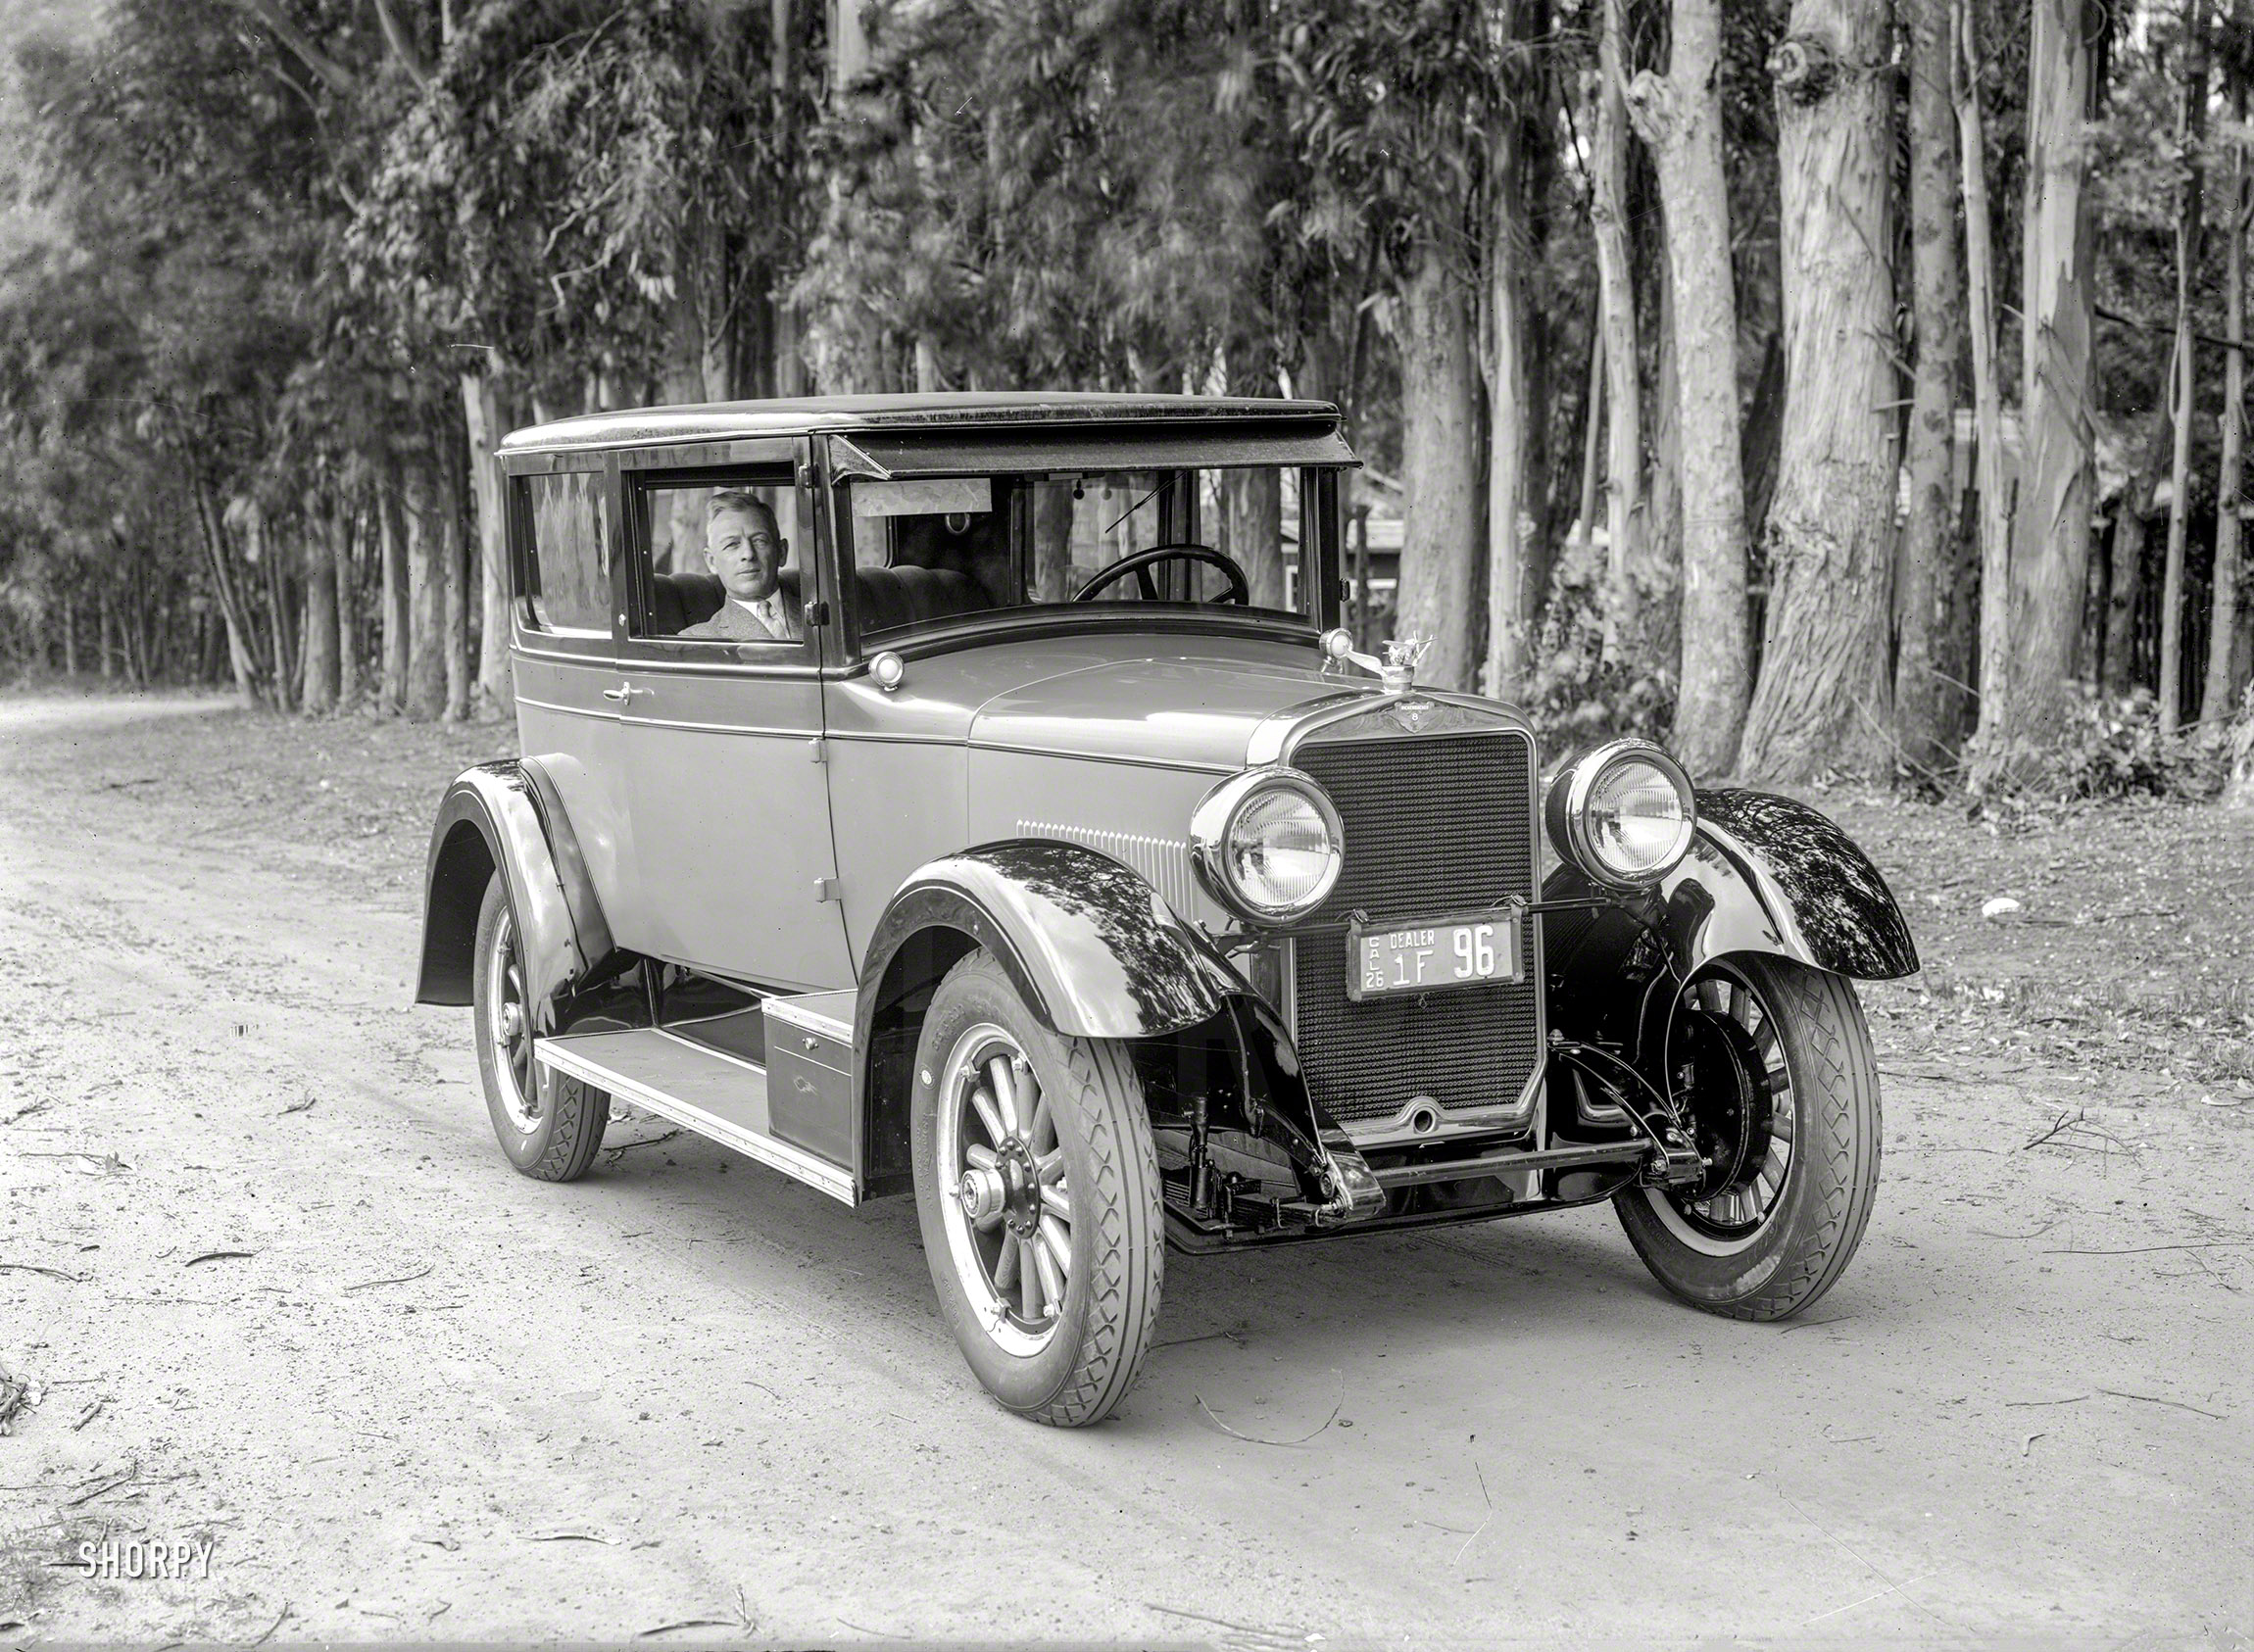 San Francisco, 1926. "Rickenbacker in woods." Another automotive marque not long for this world. 5x7 glass negative by Christopher Helin. View full size.